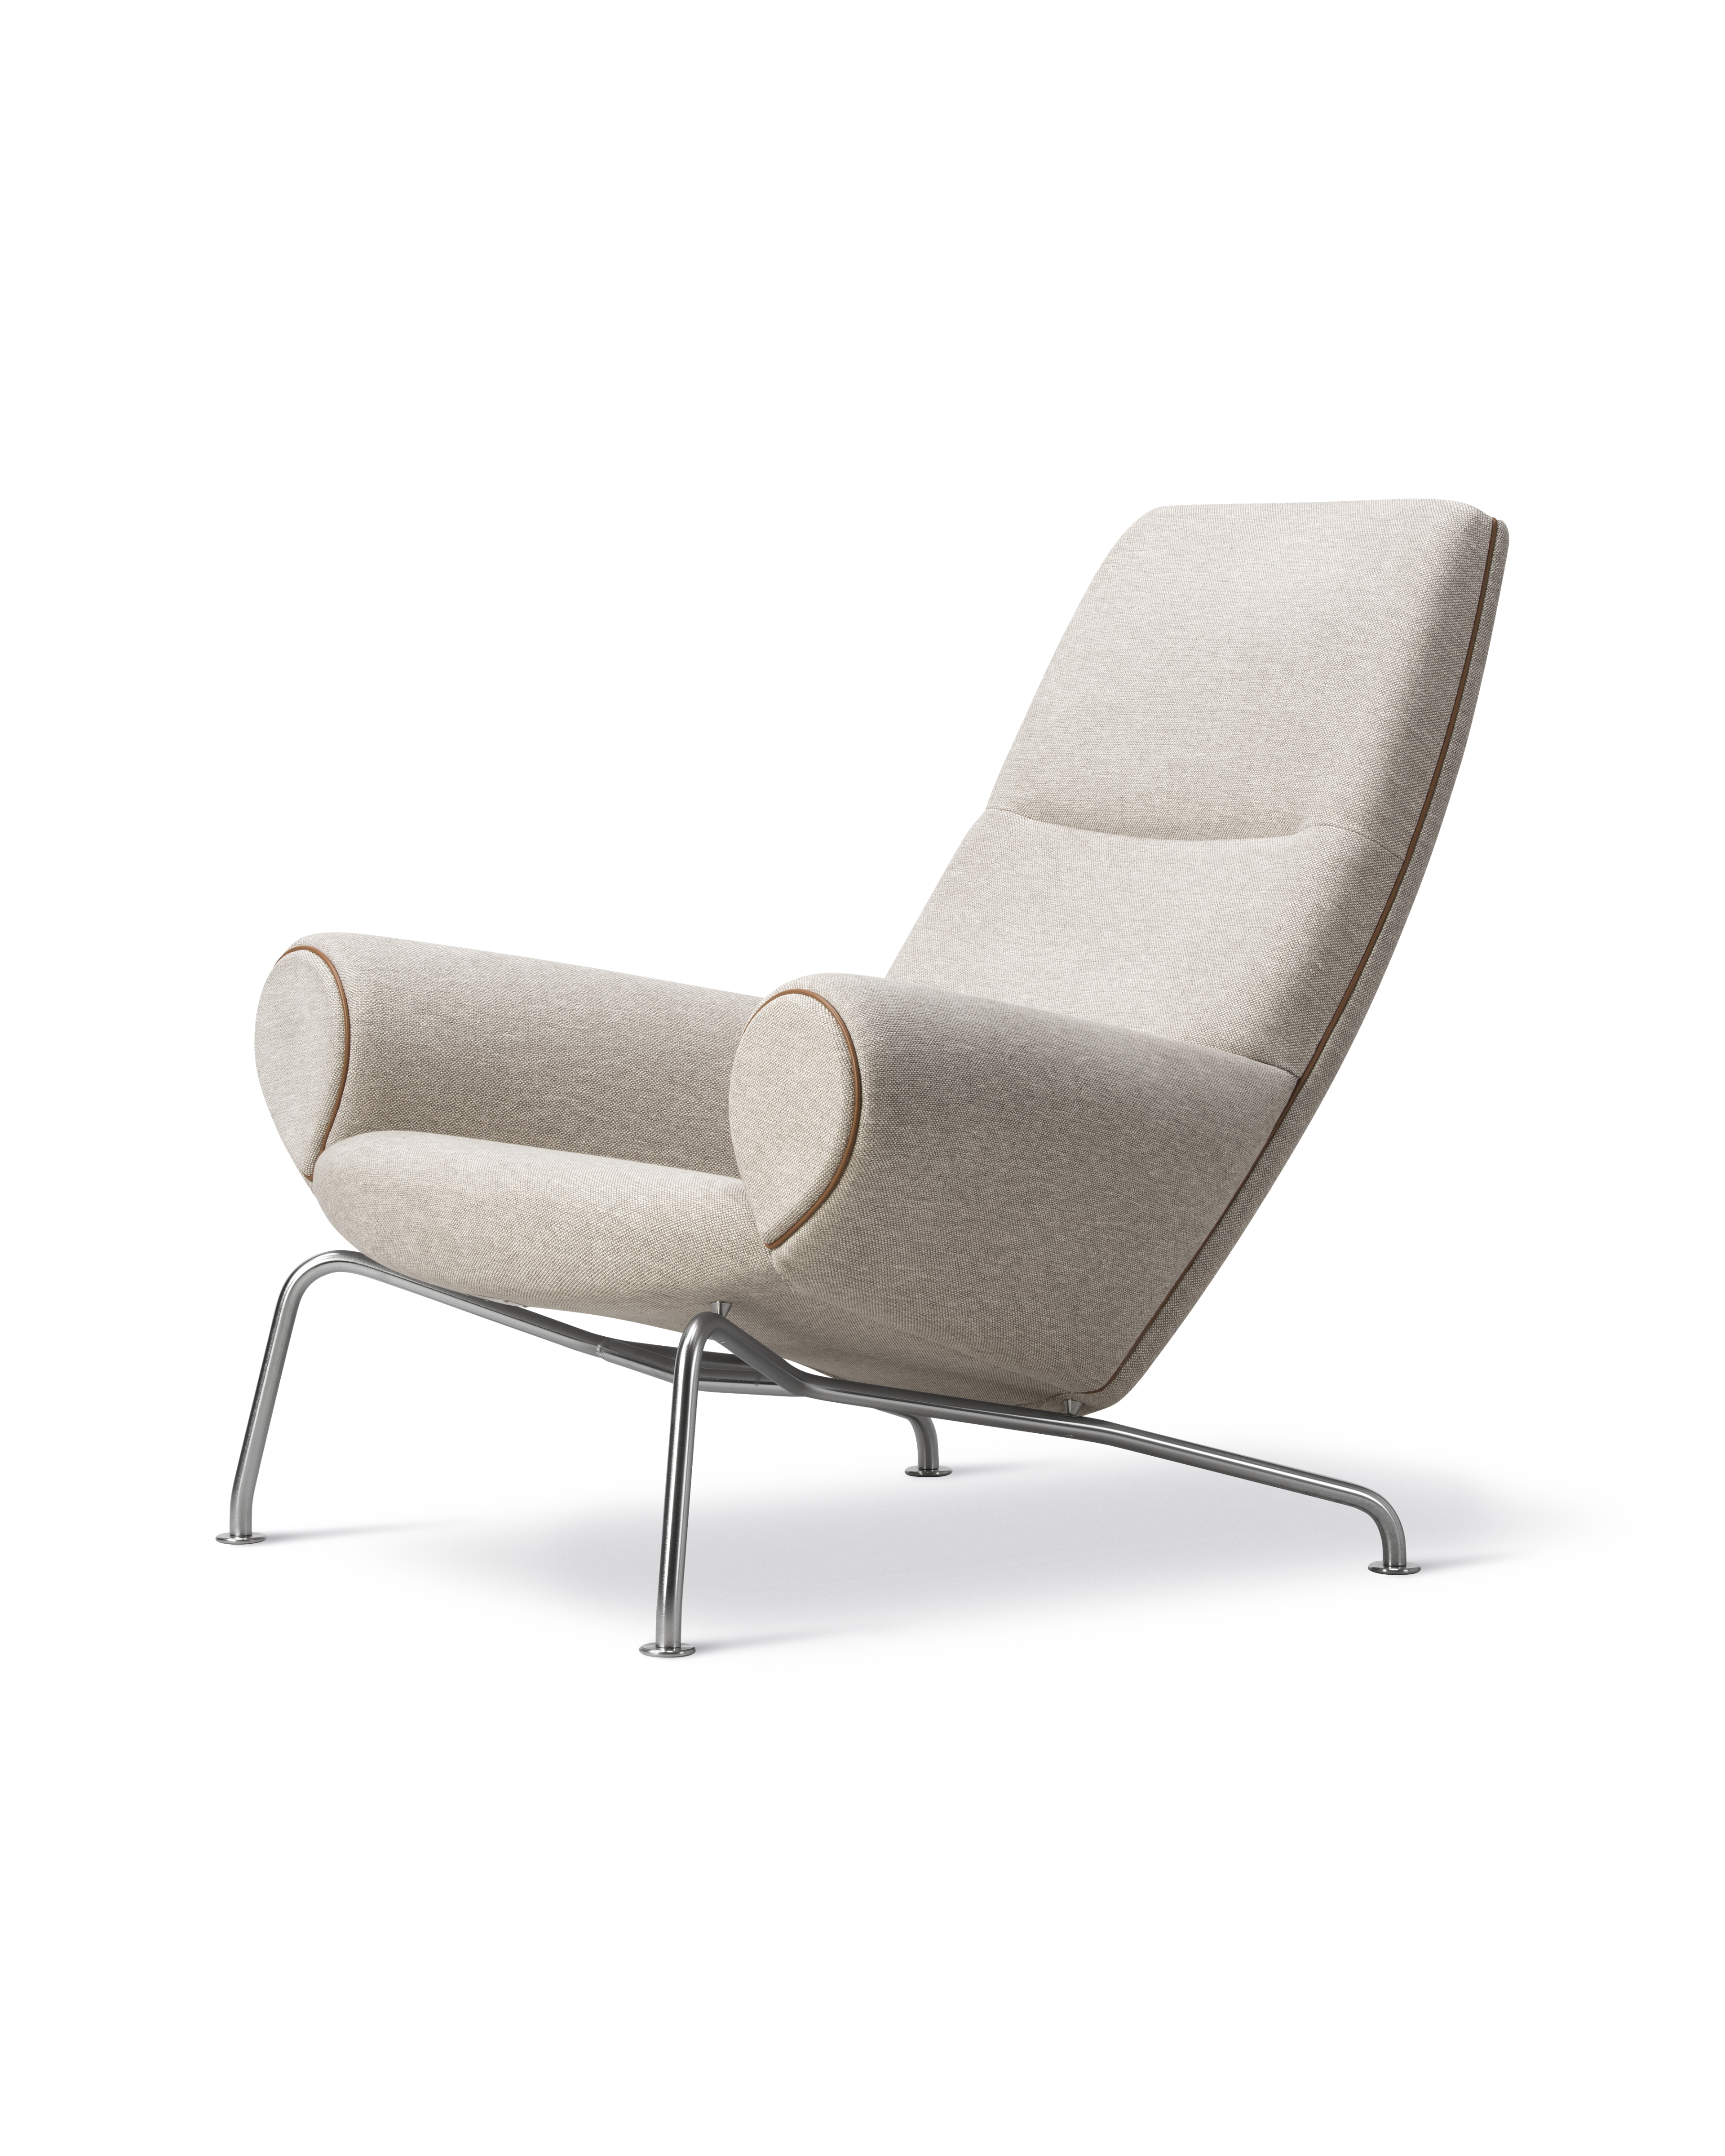 Wegner Queen Chair - Clay 12 / Brushed chrome frame / Leather piping 91 Max 